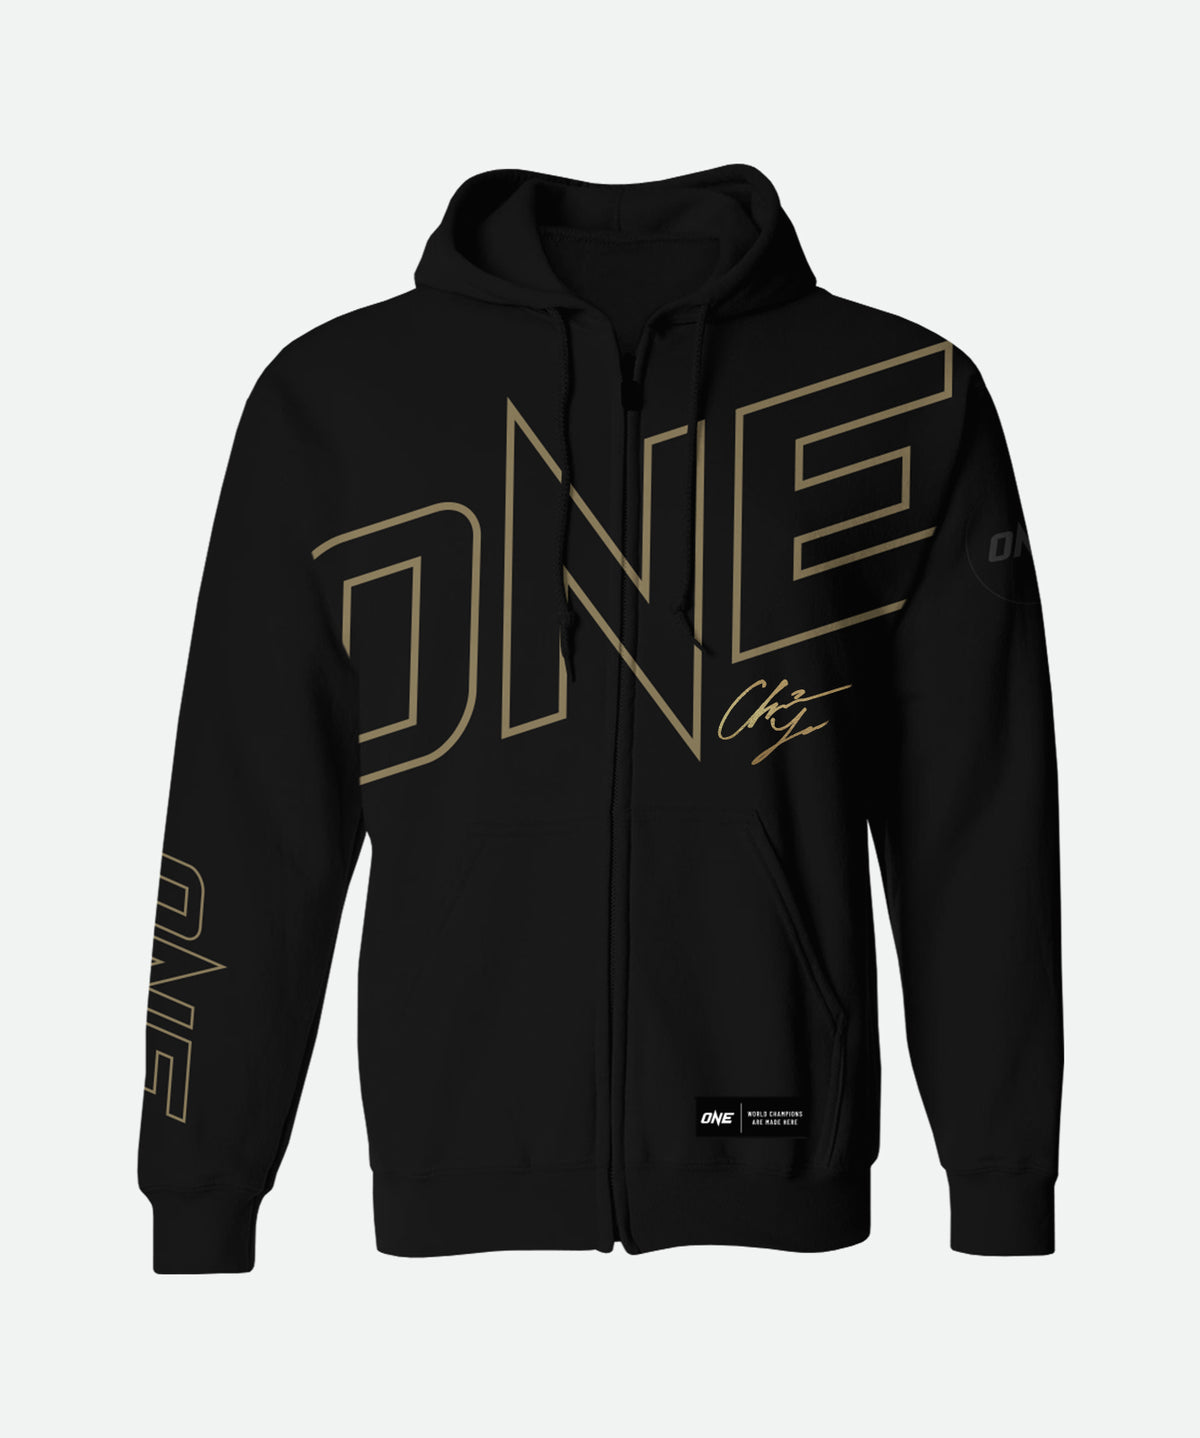 ONE World Champion Walkout Zip Autographed Hoodie (Christian Lee)